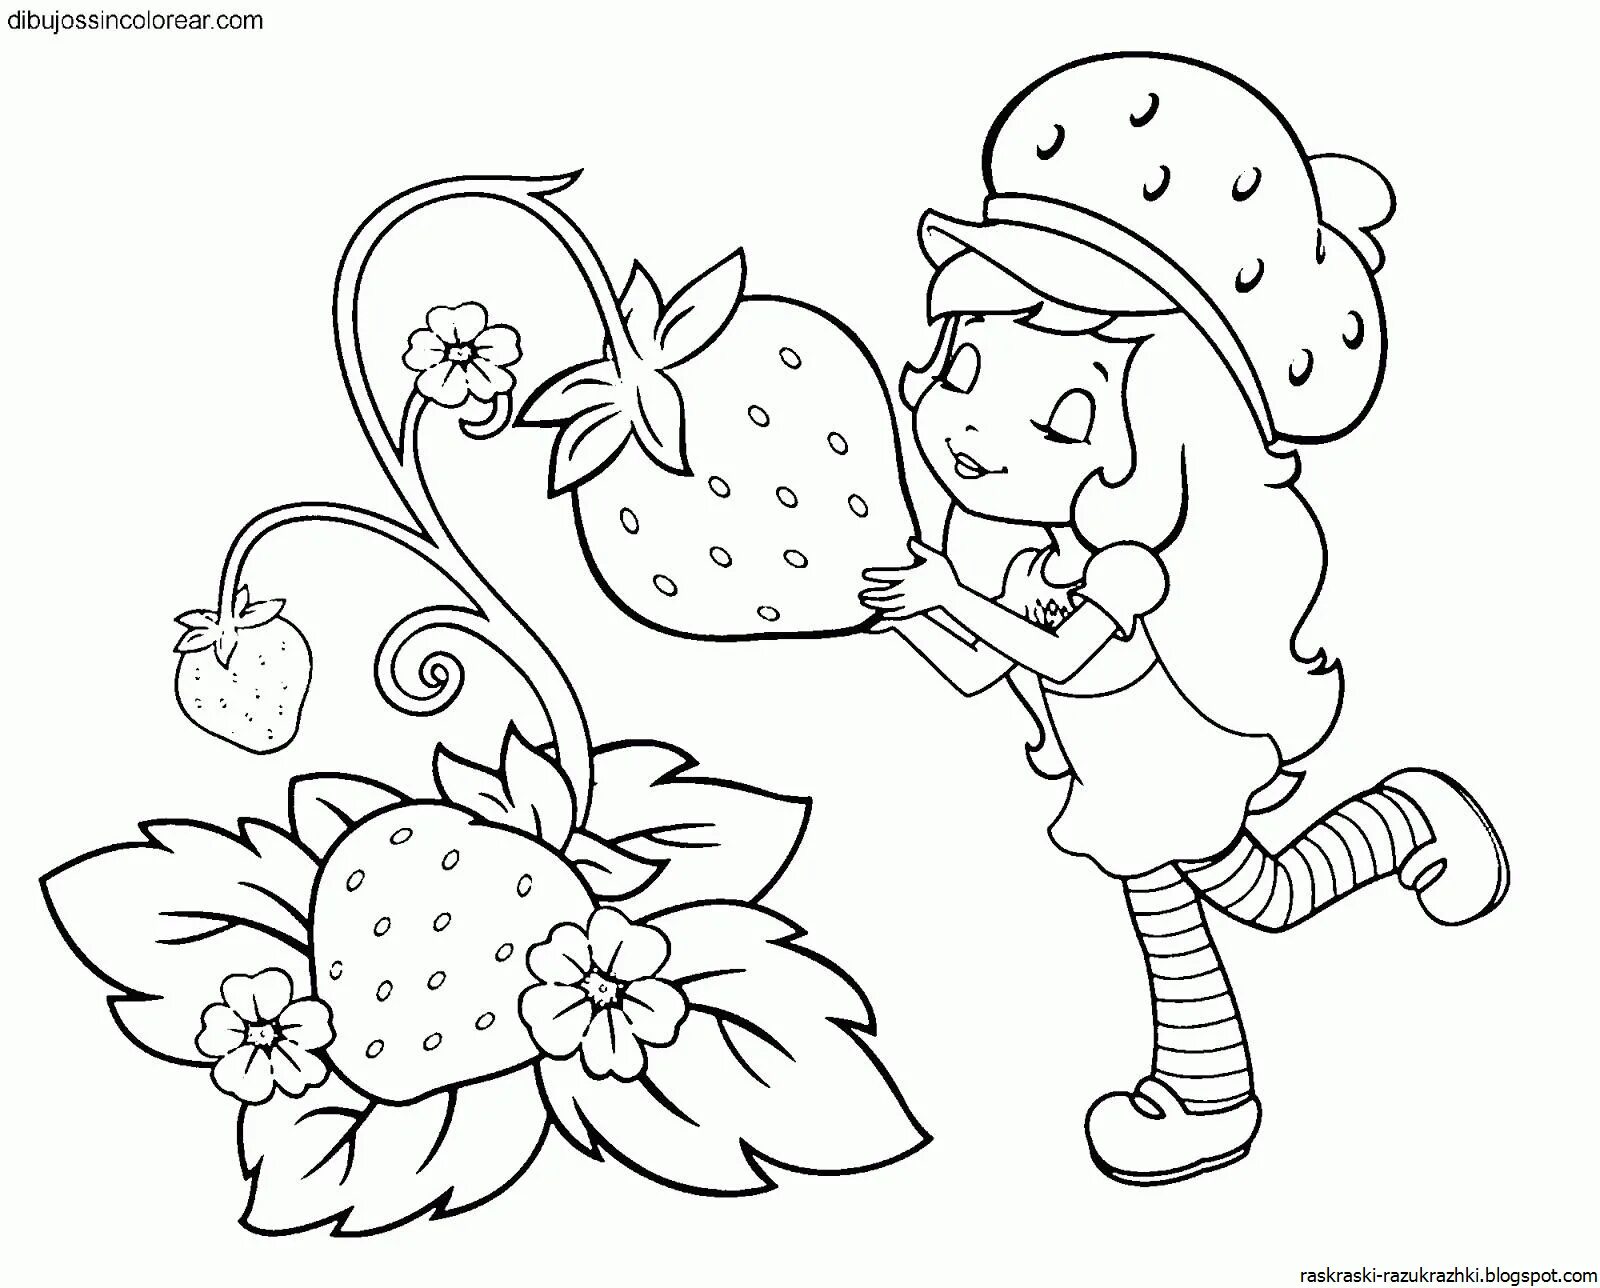 Coloring pages for girls with colorful and exciting berries